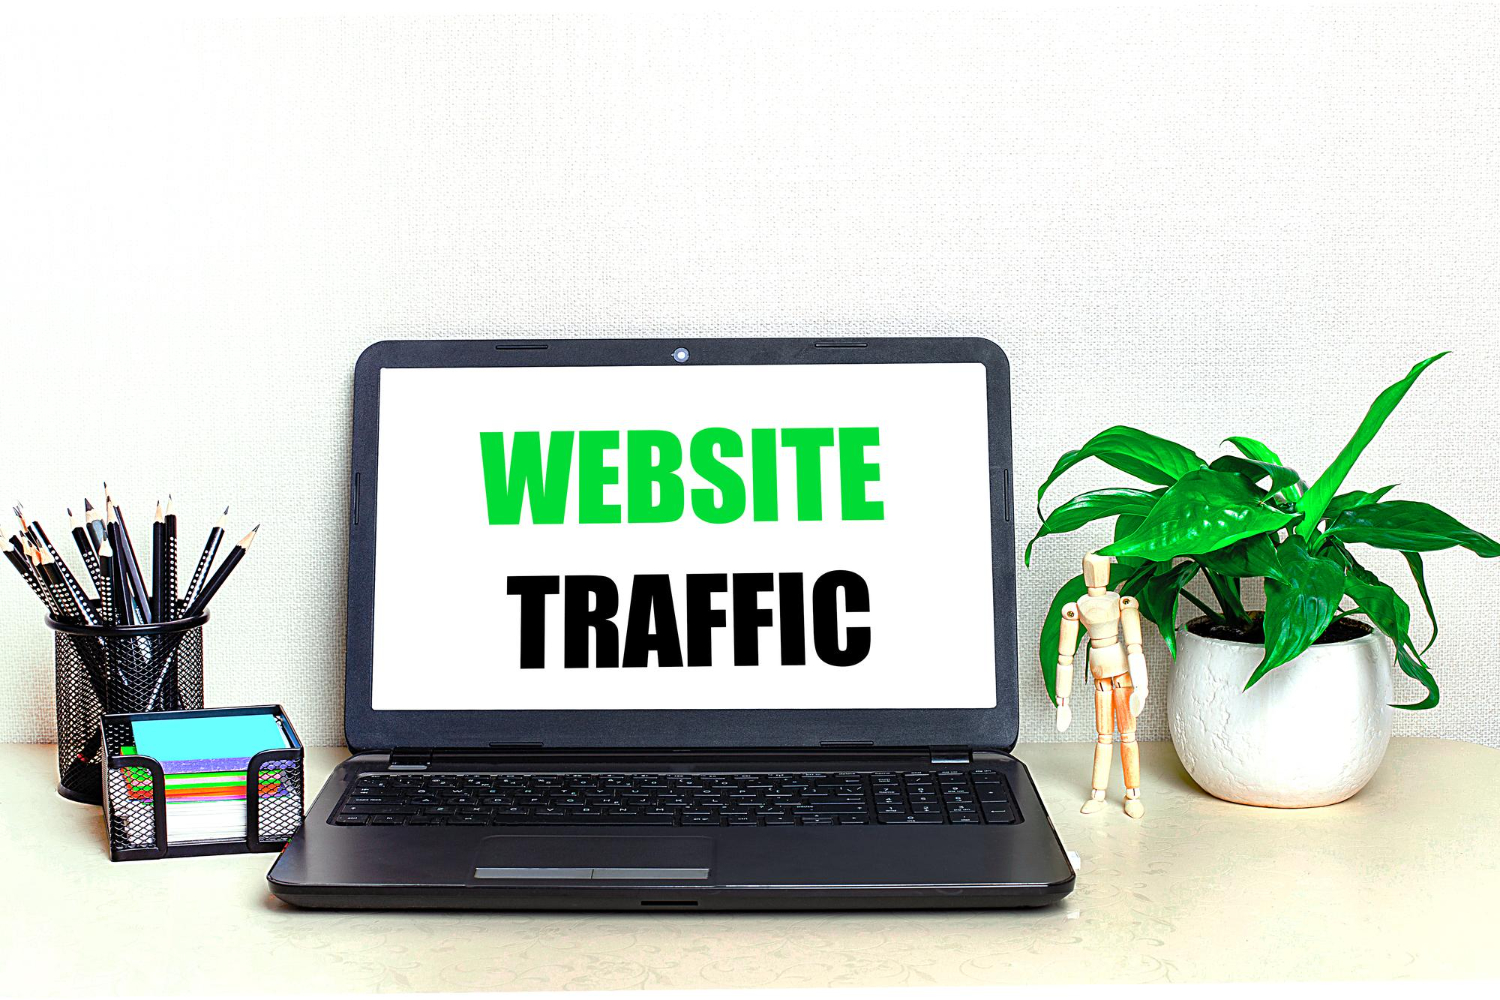 Where can I find the best traffic for my website?